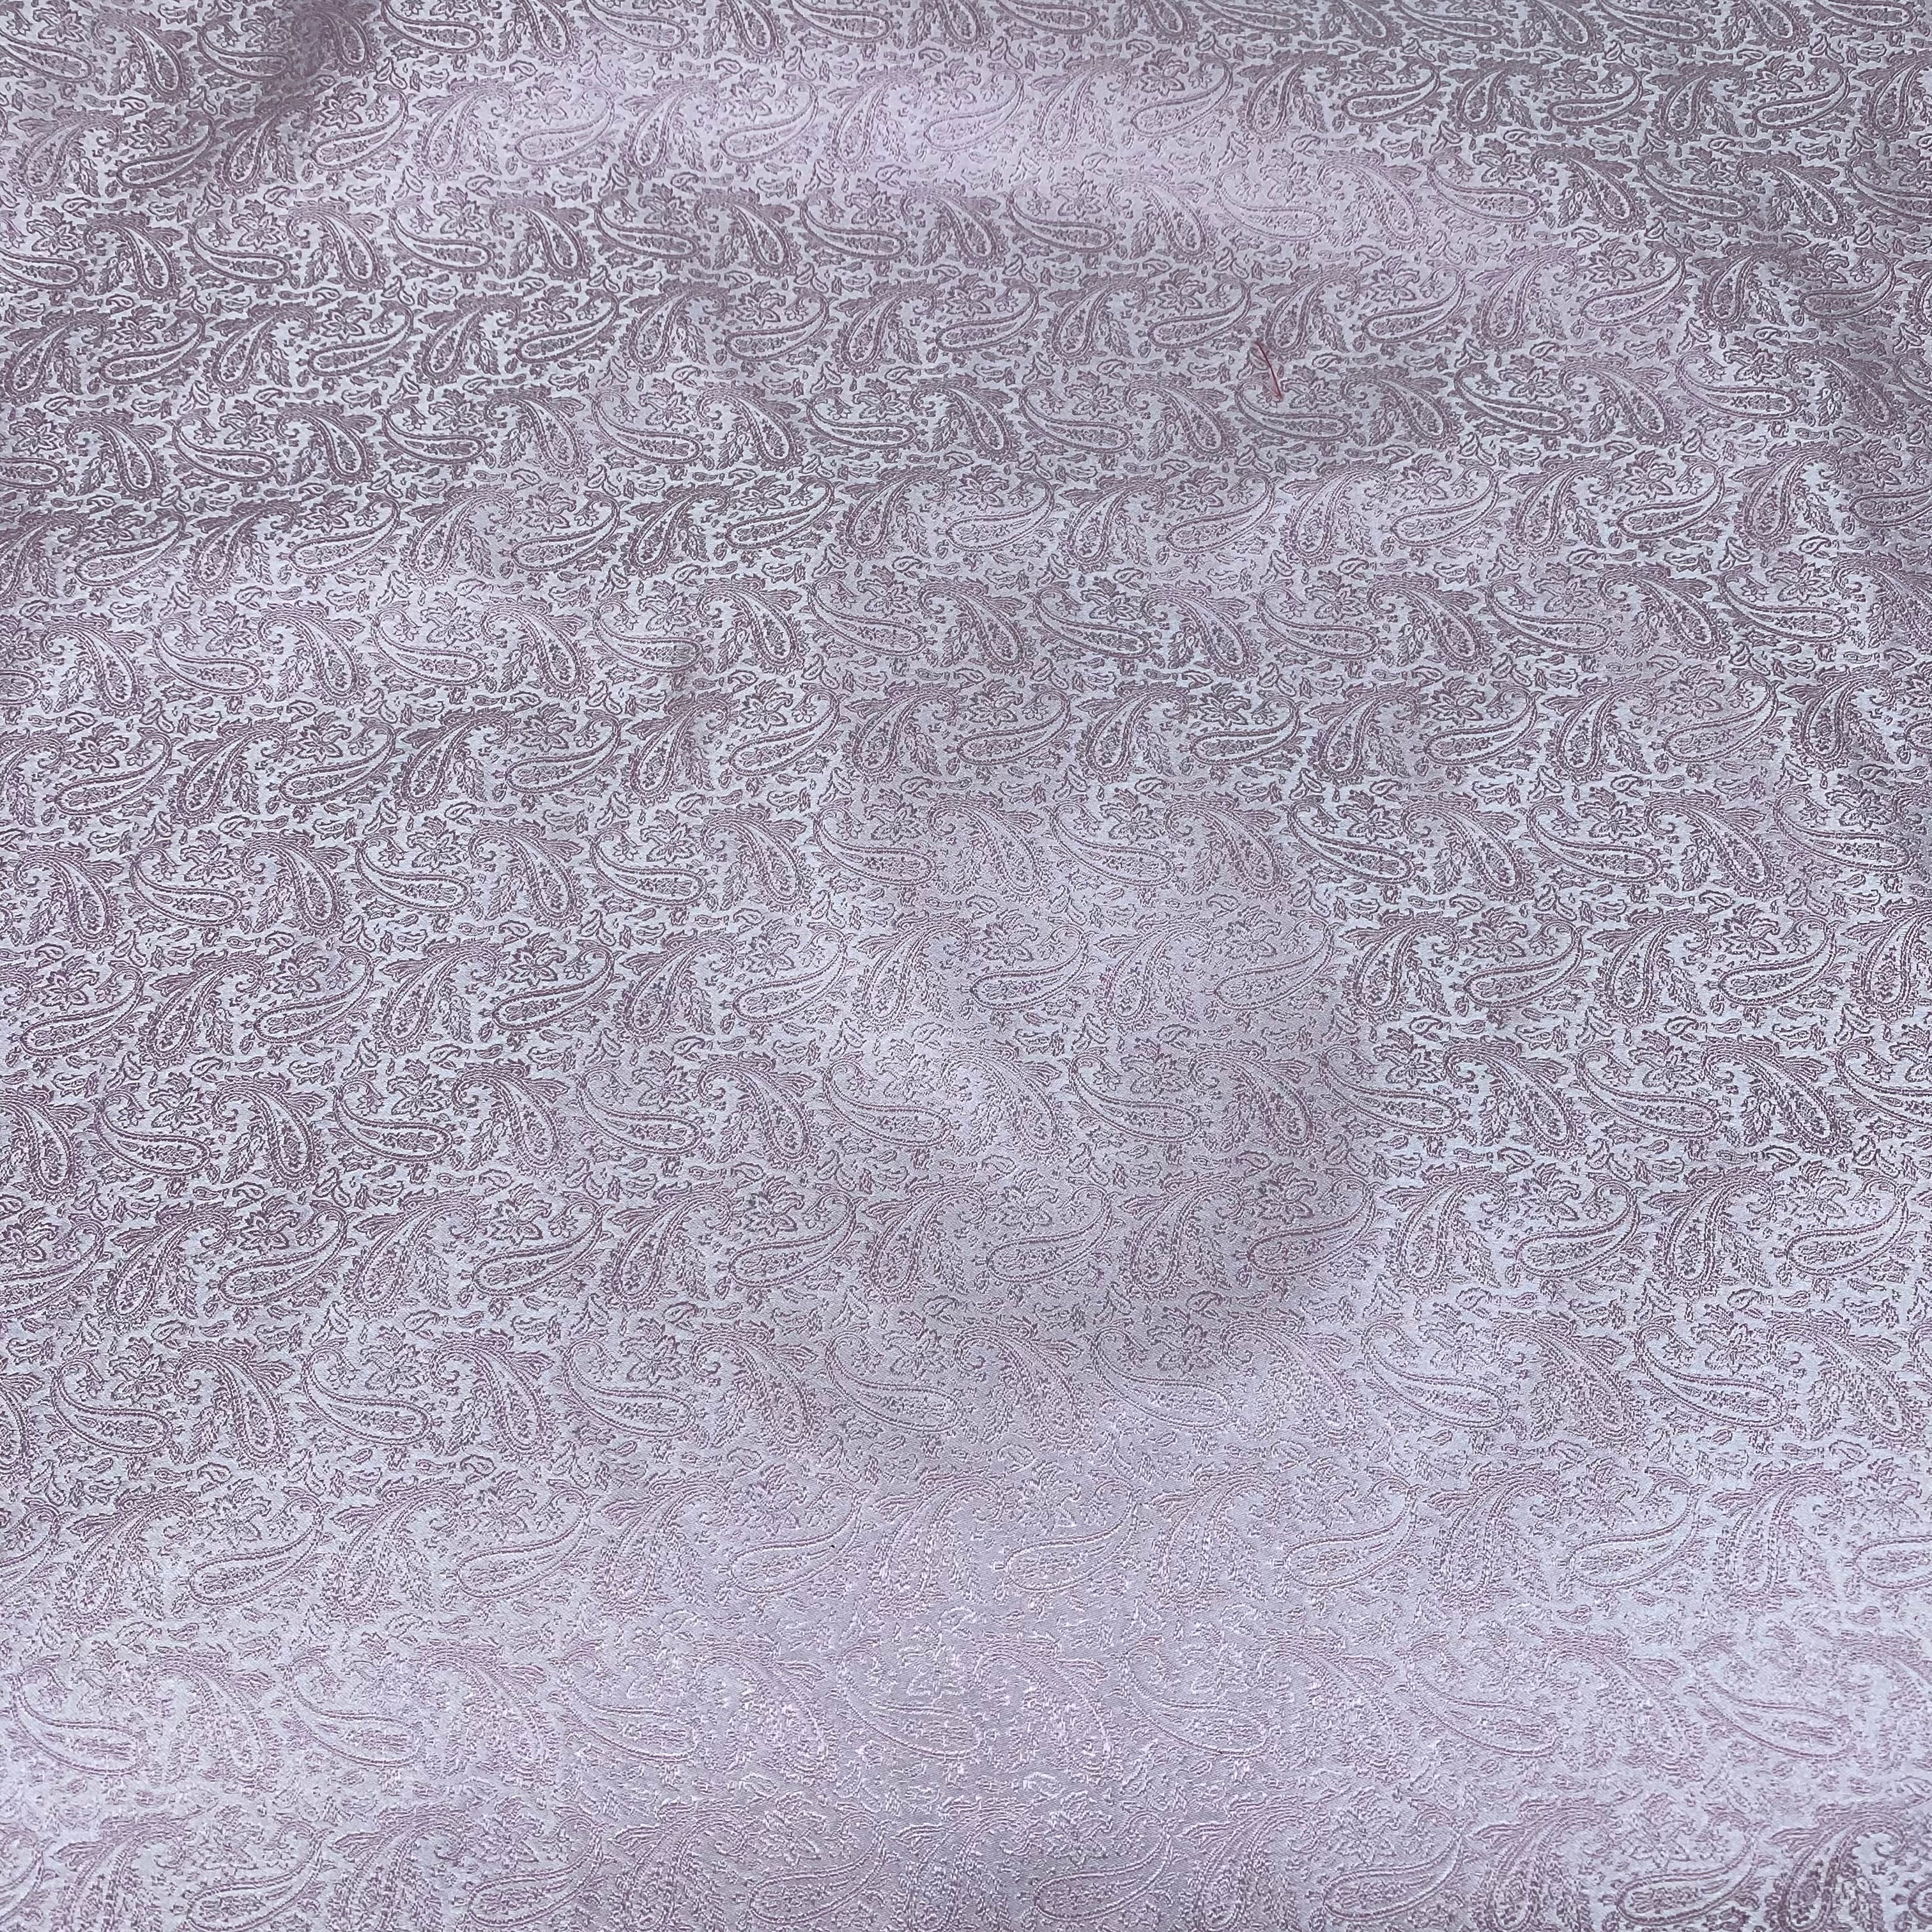 Paisley Silk/Polyester Jacquard - Pink / White - Remnant